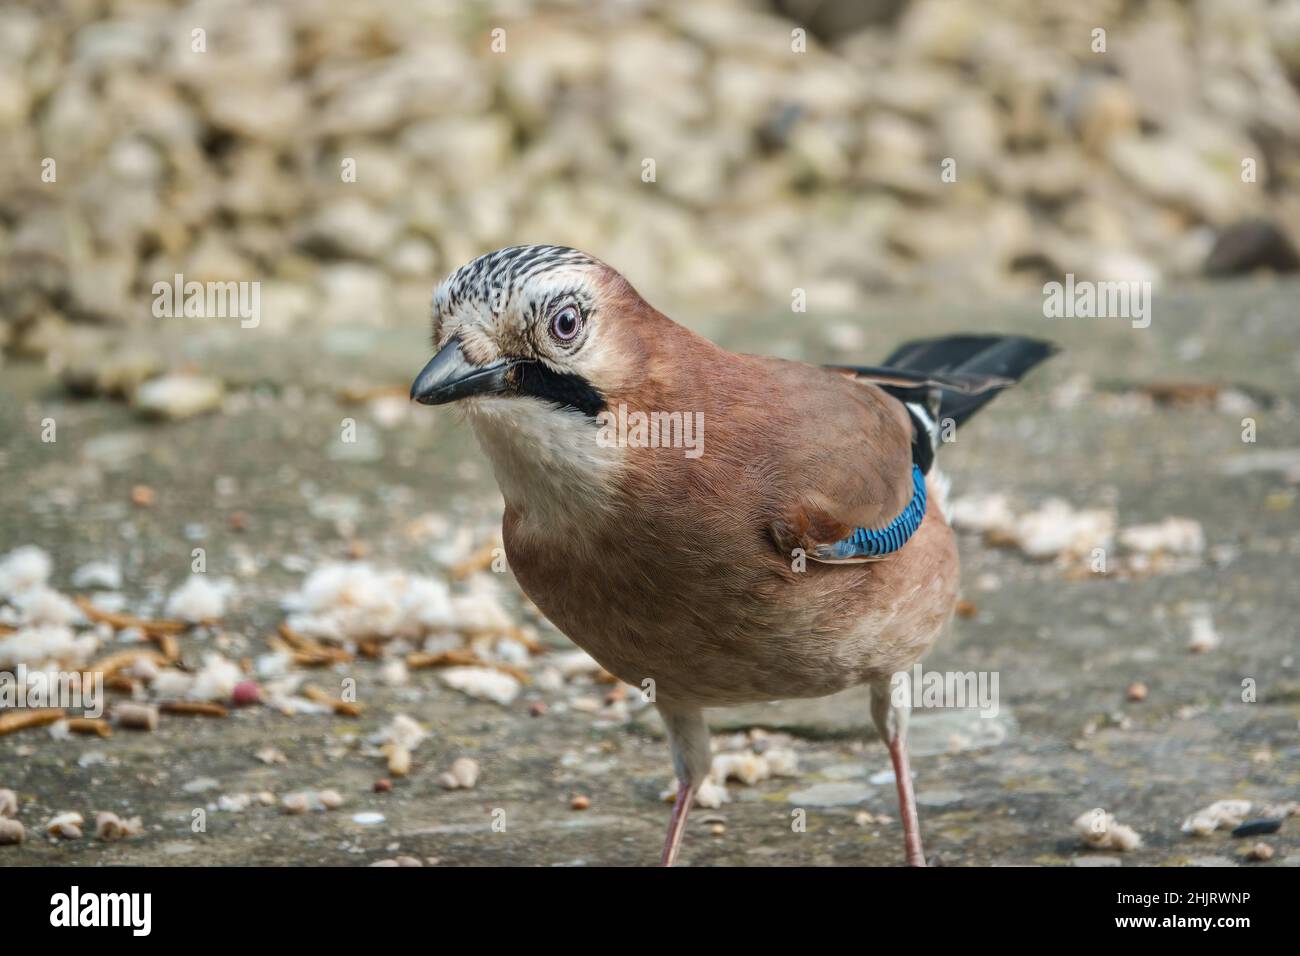 close up of a jay (Garrulus glandarius) eating bird seed and bread from amongst patio stones Stock Photo